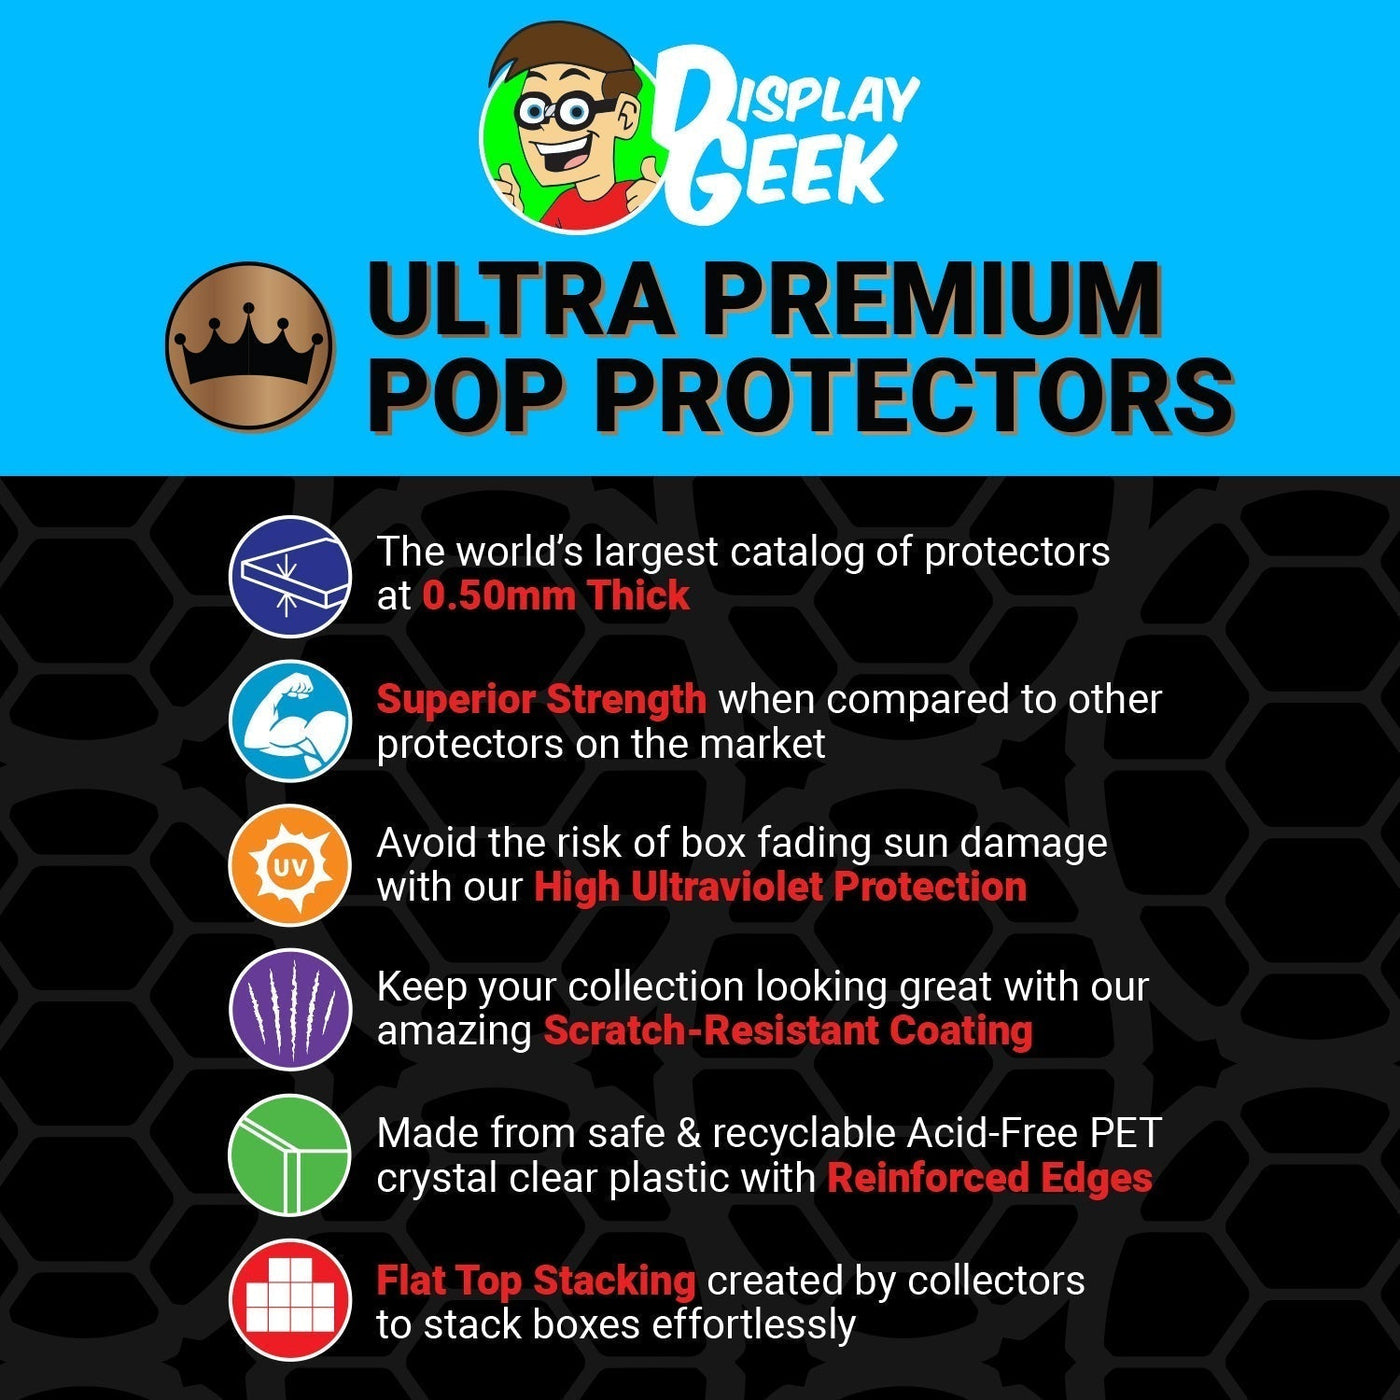 Pop Protector for Funkoverse Darkwing Duck 100 ECCC Funko Expansion on The Protector Guide App by Display Geek